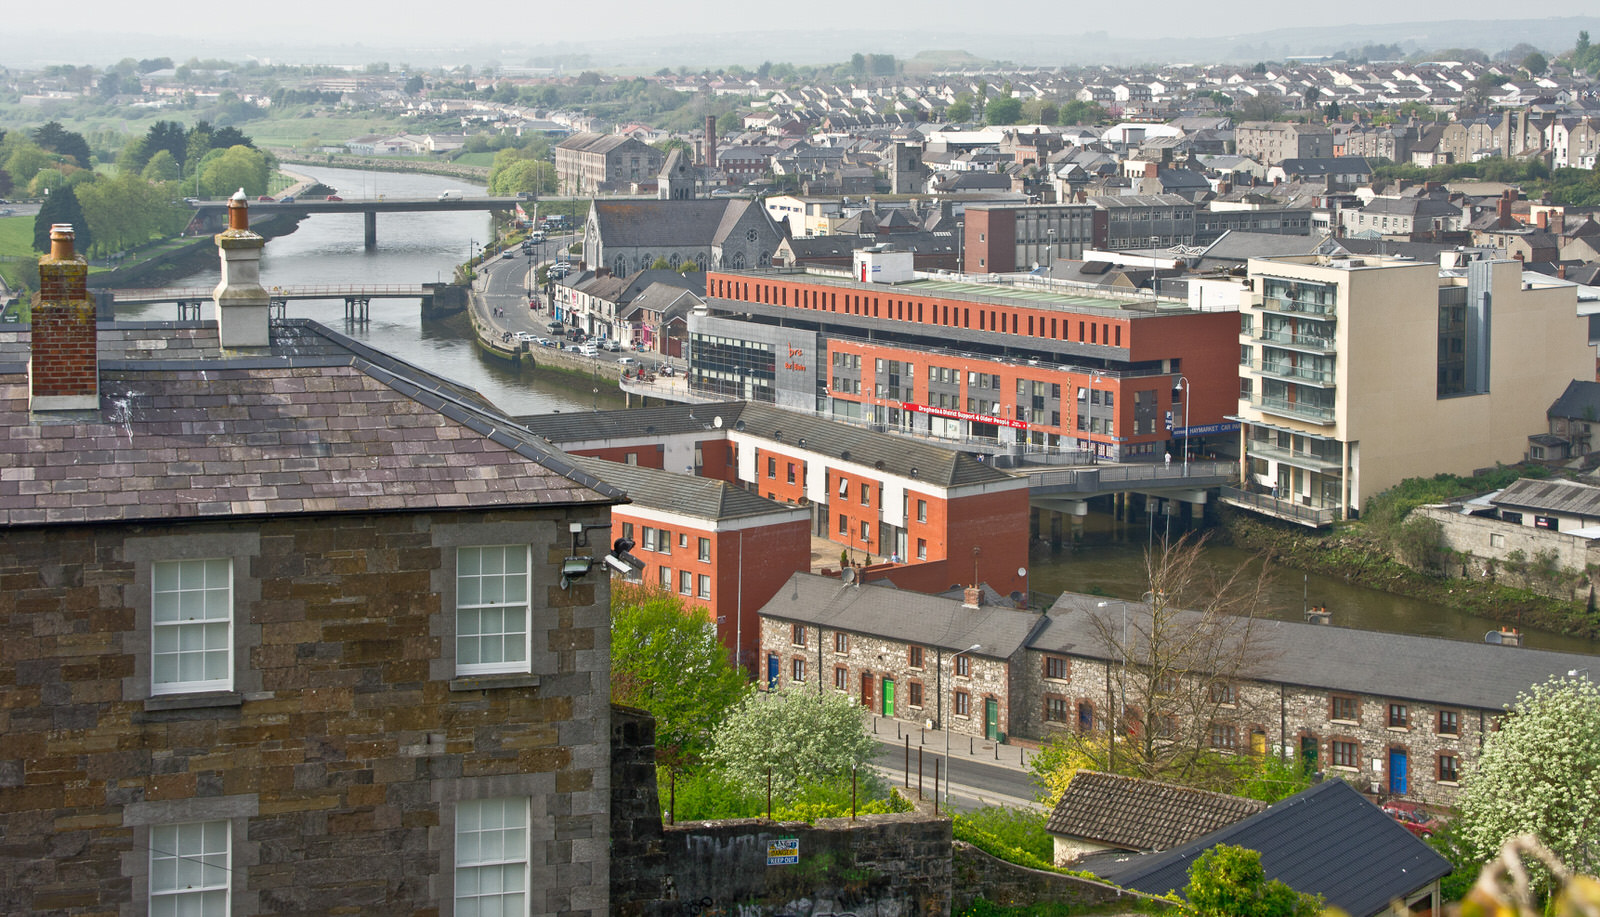 PANORAMIC VIEWS OF DROGHEDA AS IT WAS WAS IN 2011 [PRODUCED USING SONY NEX-5 PANORAMA MODE] 013